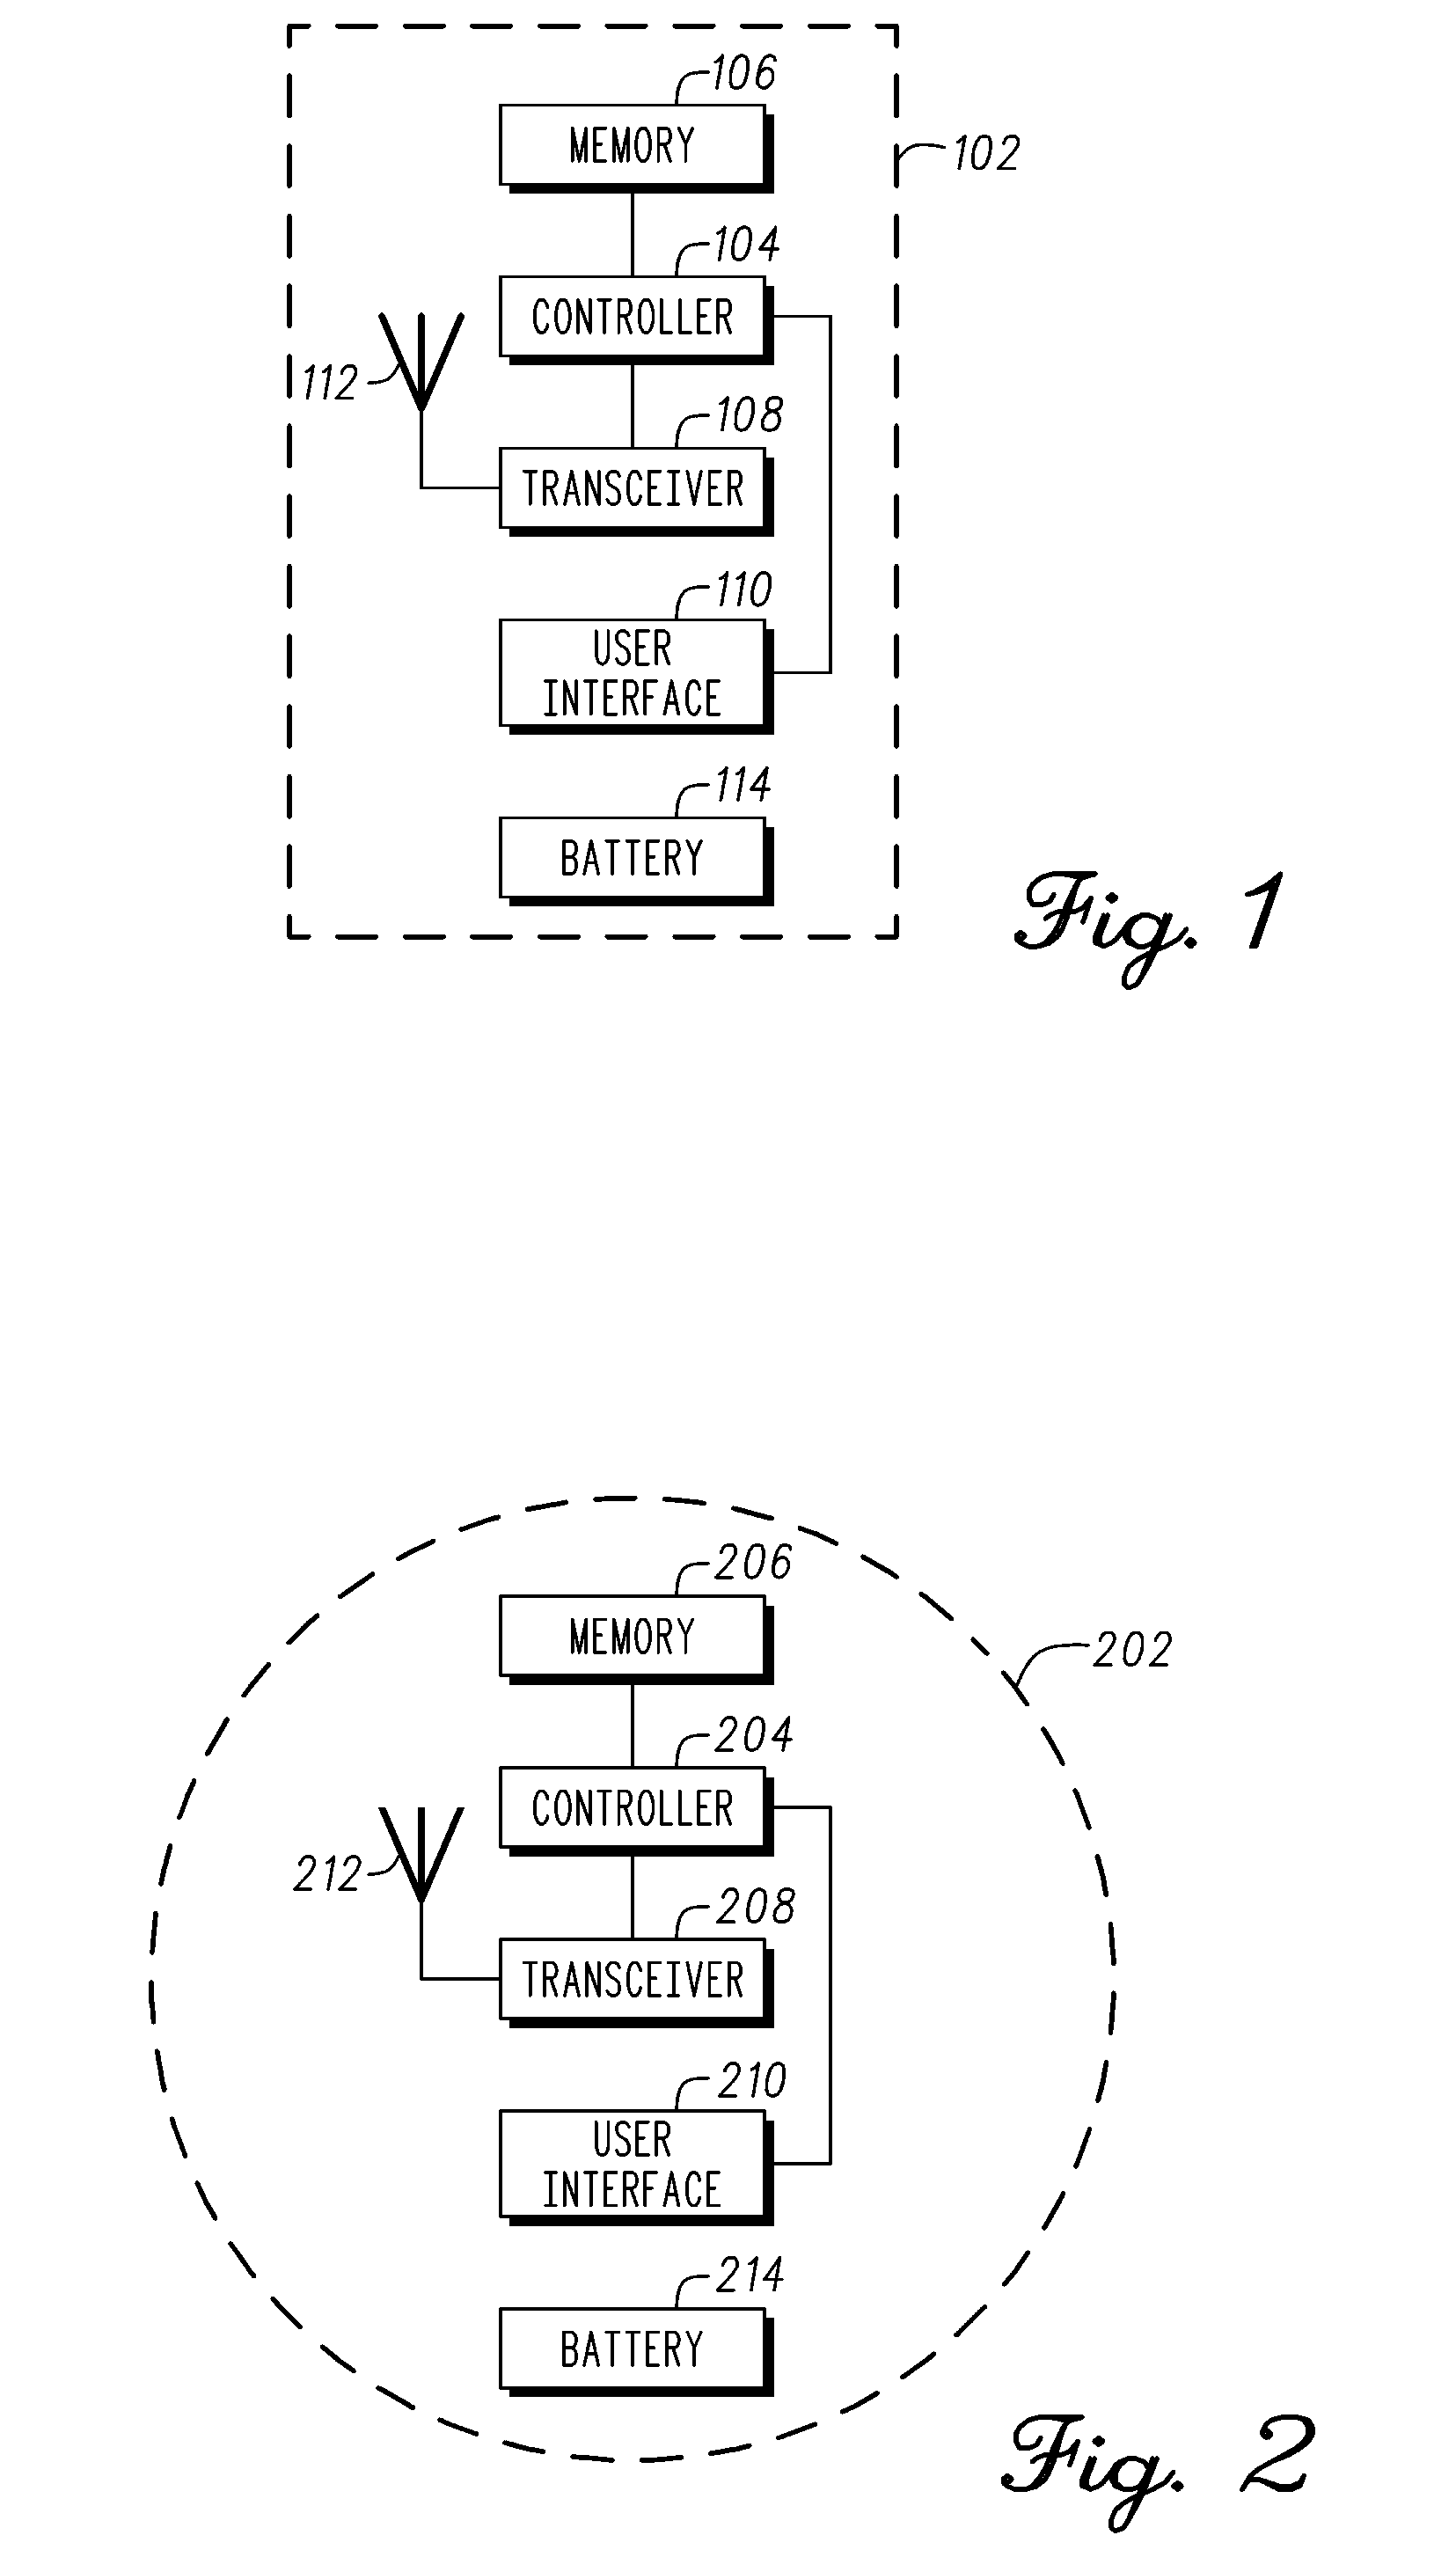 Method of passively detecting an approach to a vehicle